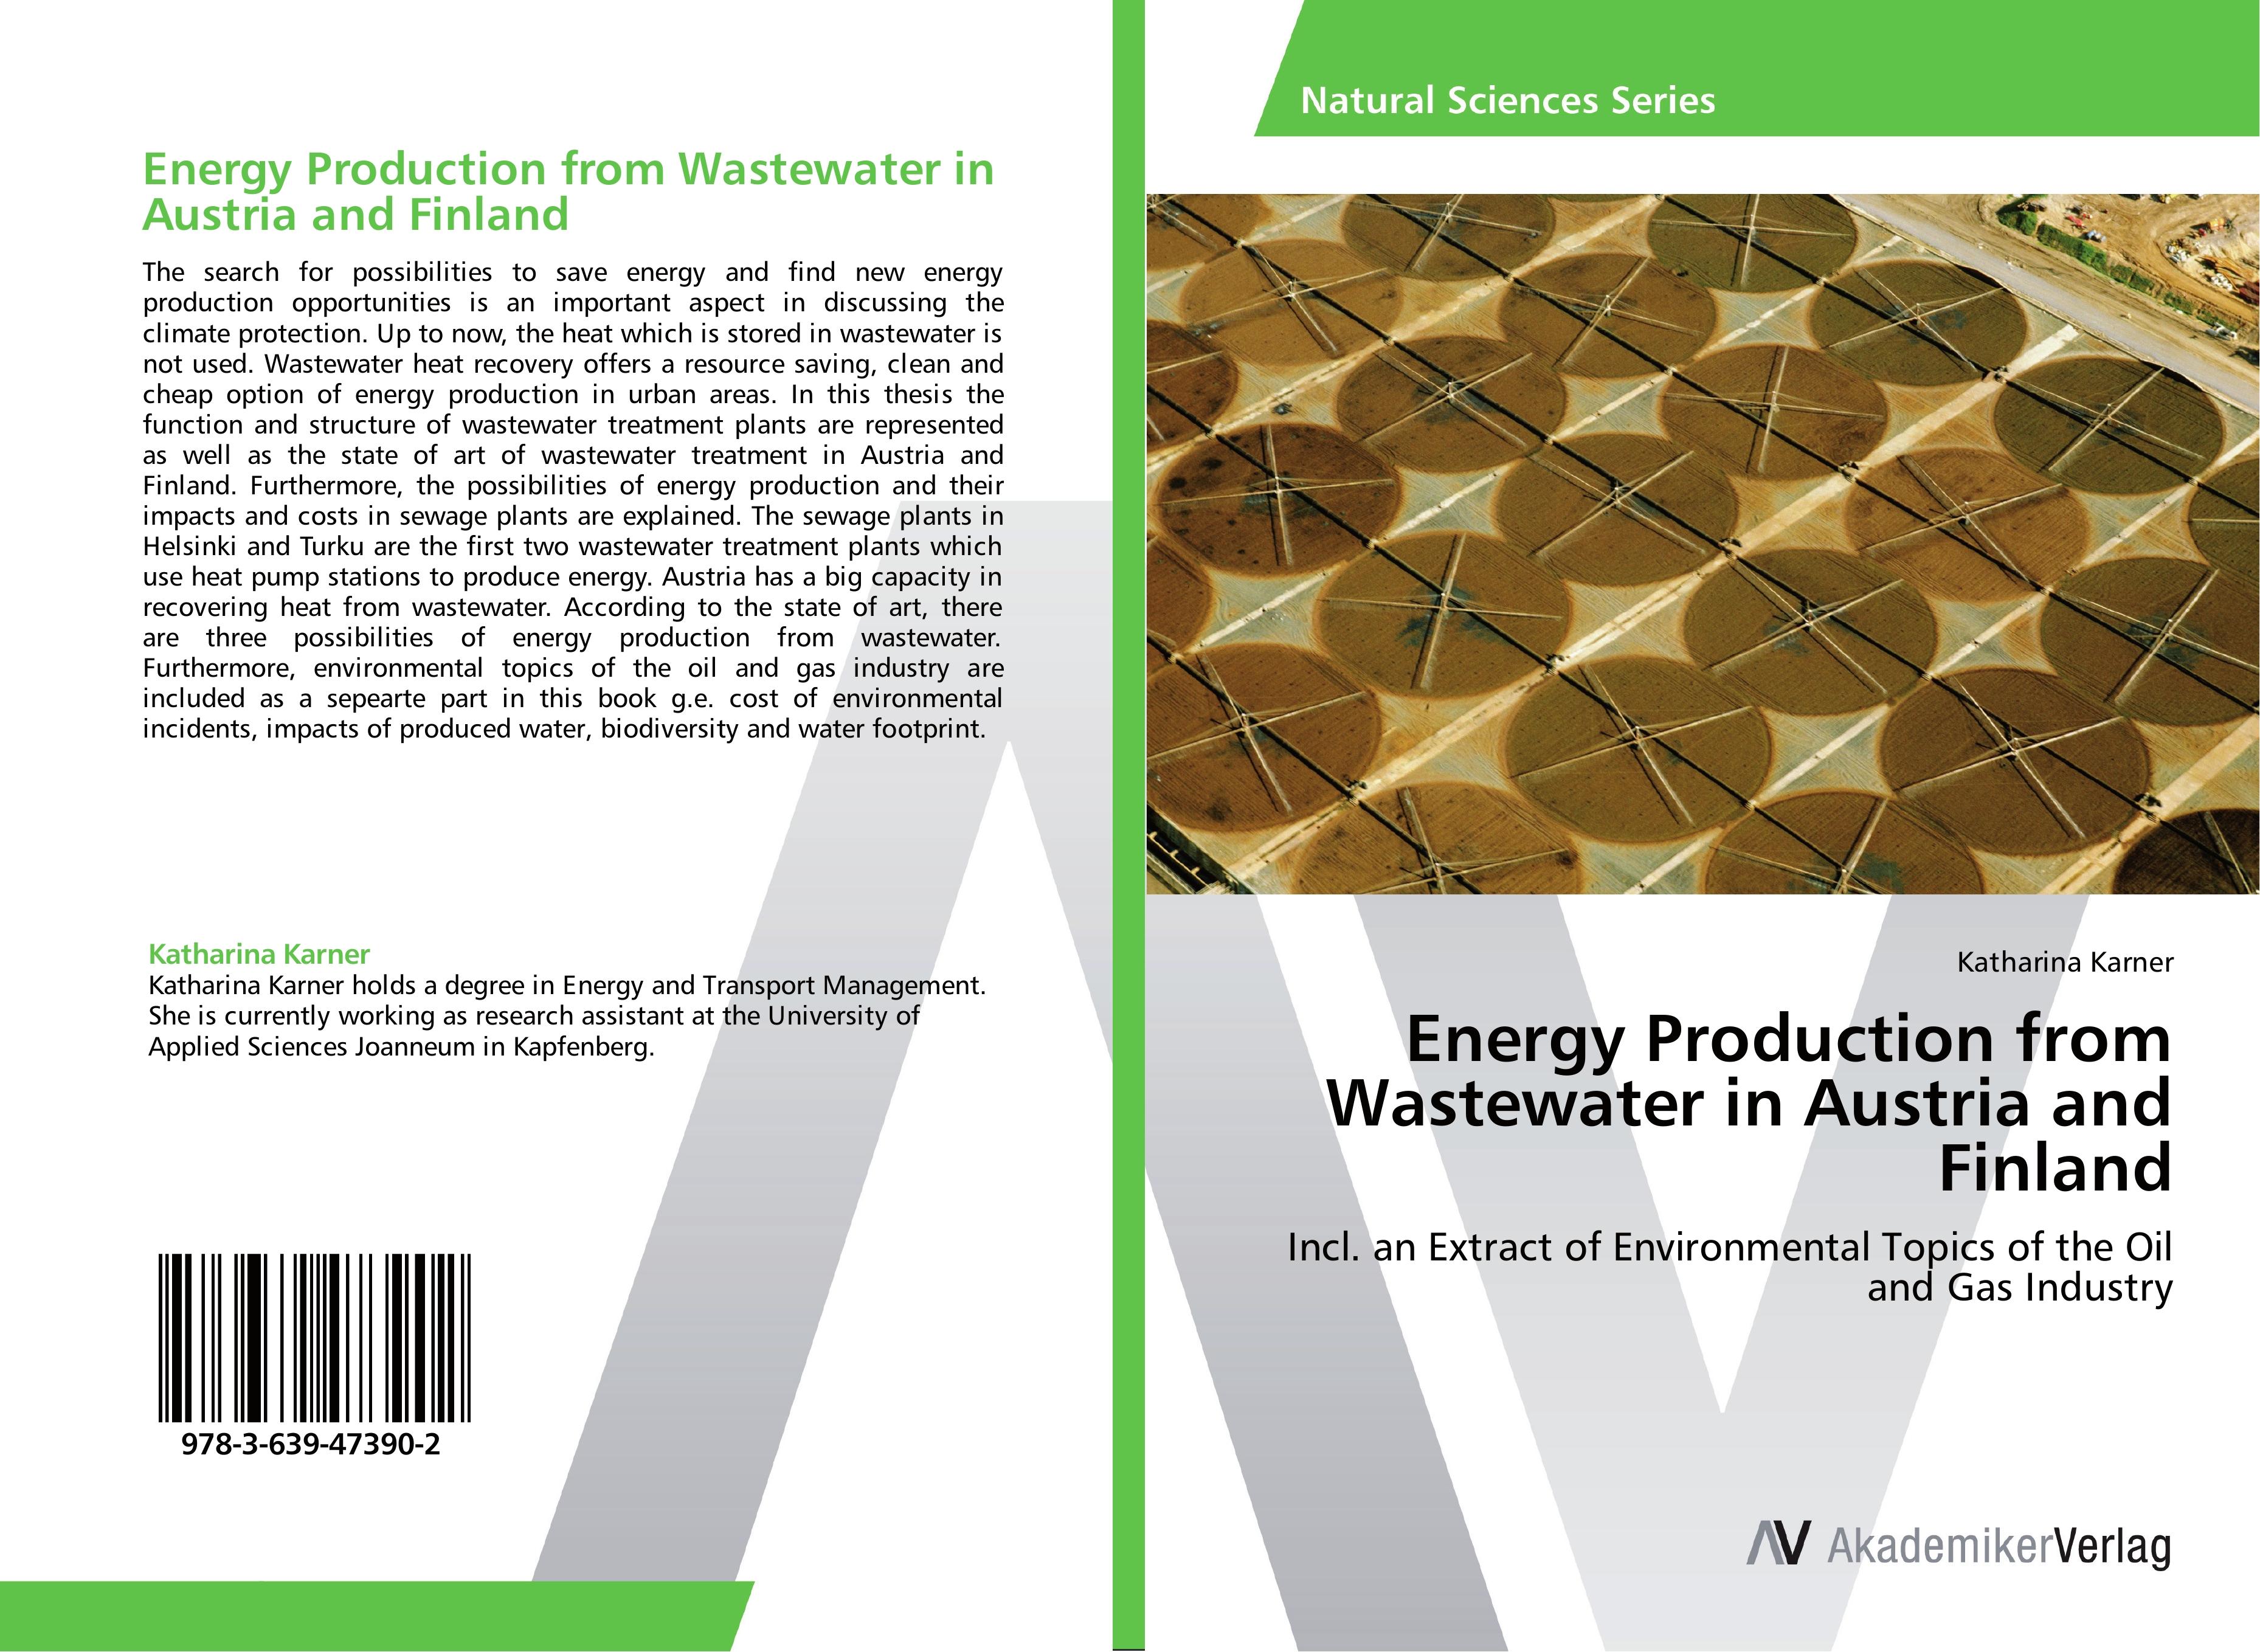 Energy Production from Wastewater in Austria and Finland - Katharina Karner